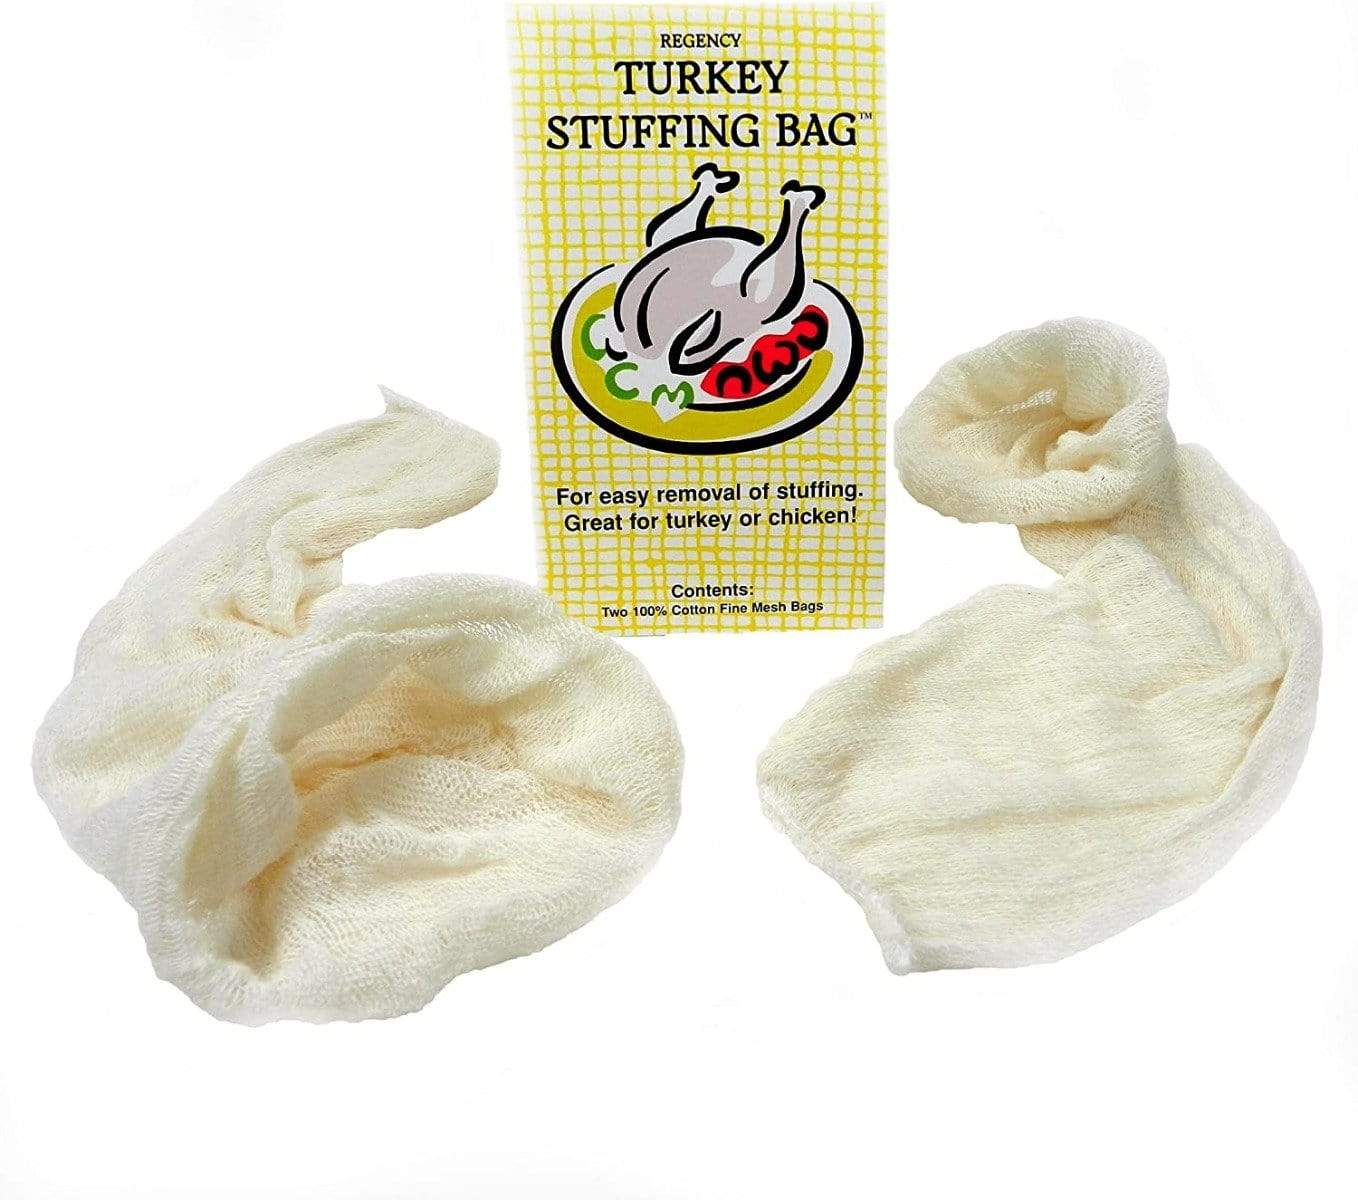 Kitchen & Company Meat & Poultry Tools Set of 2 Regency Turkey Stuffing Bags